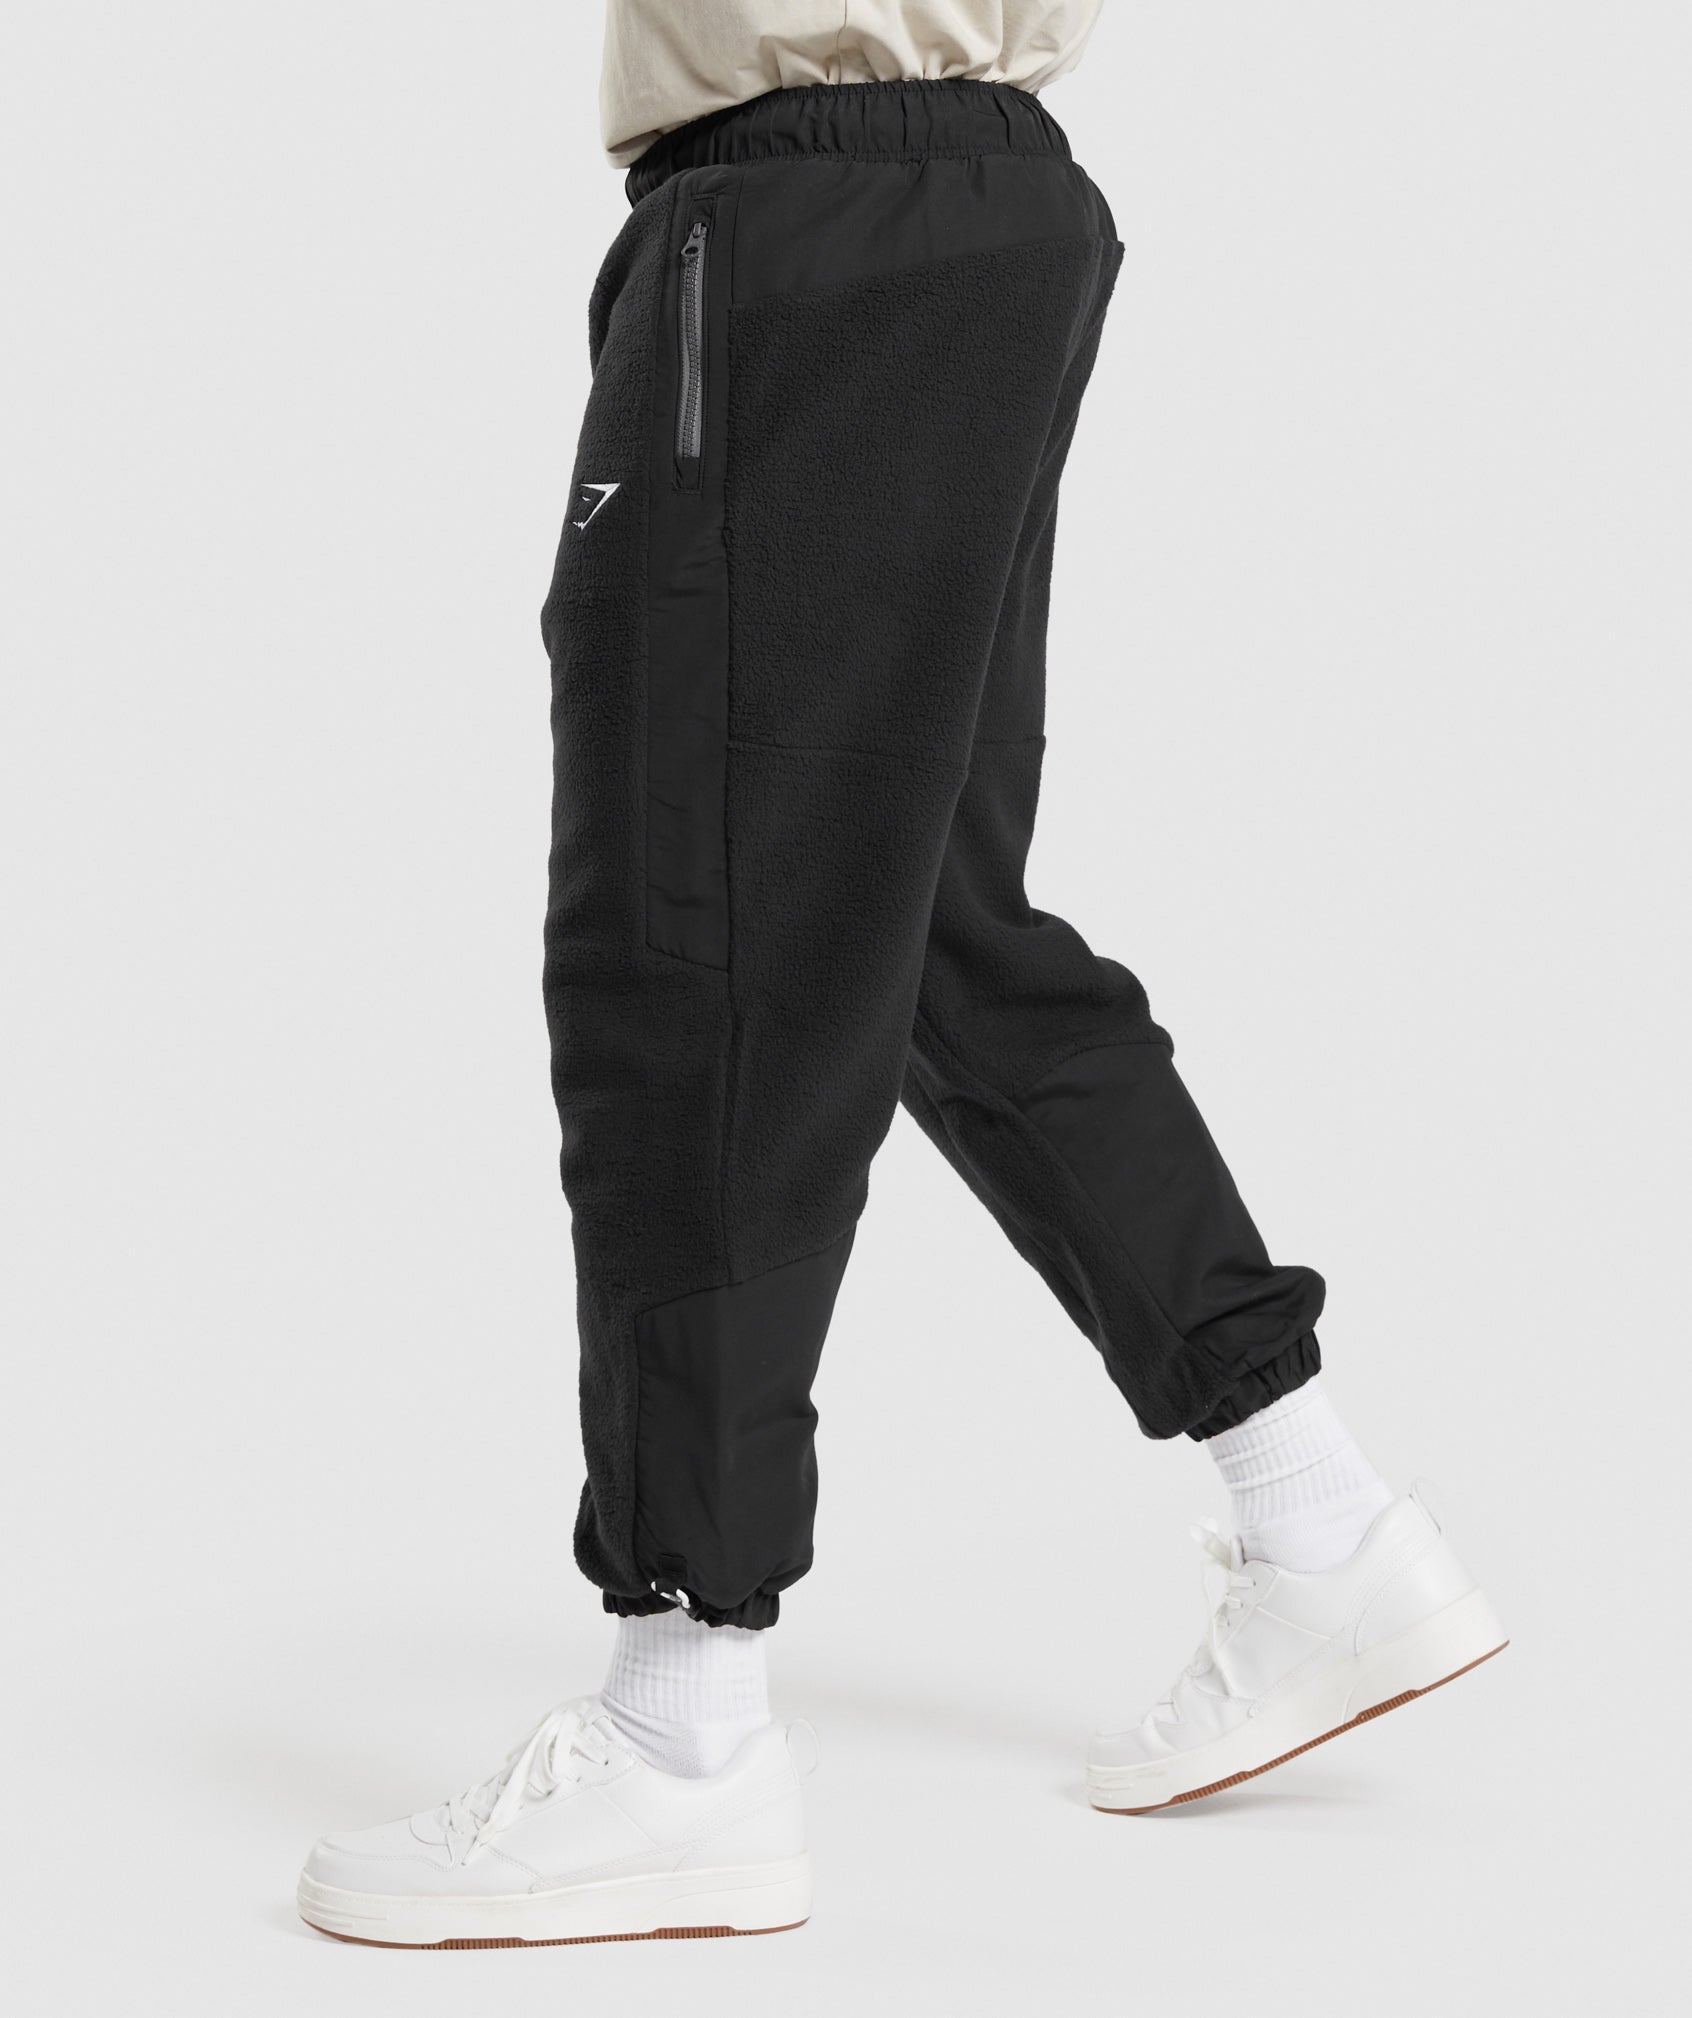 Vibes Joggers in Black - view 3